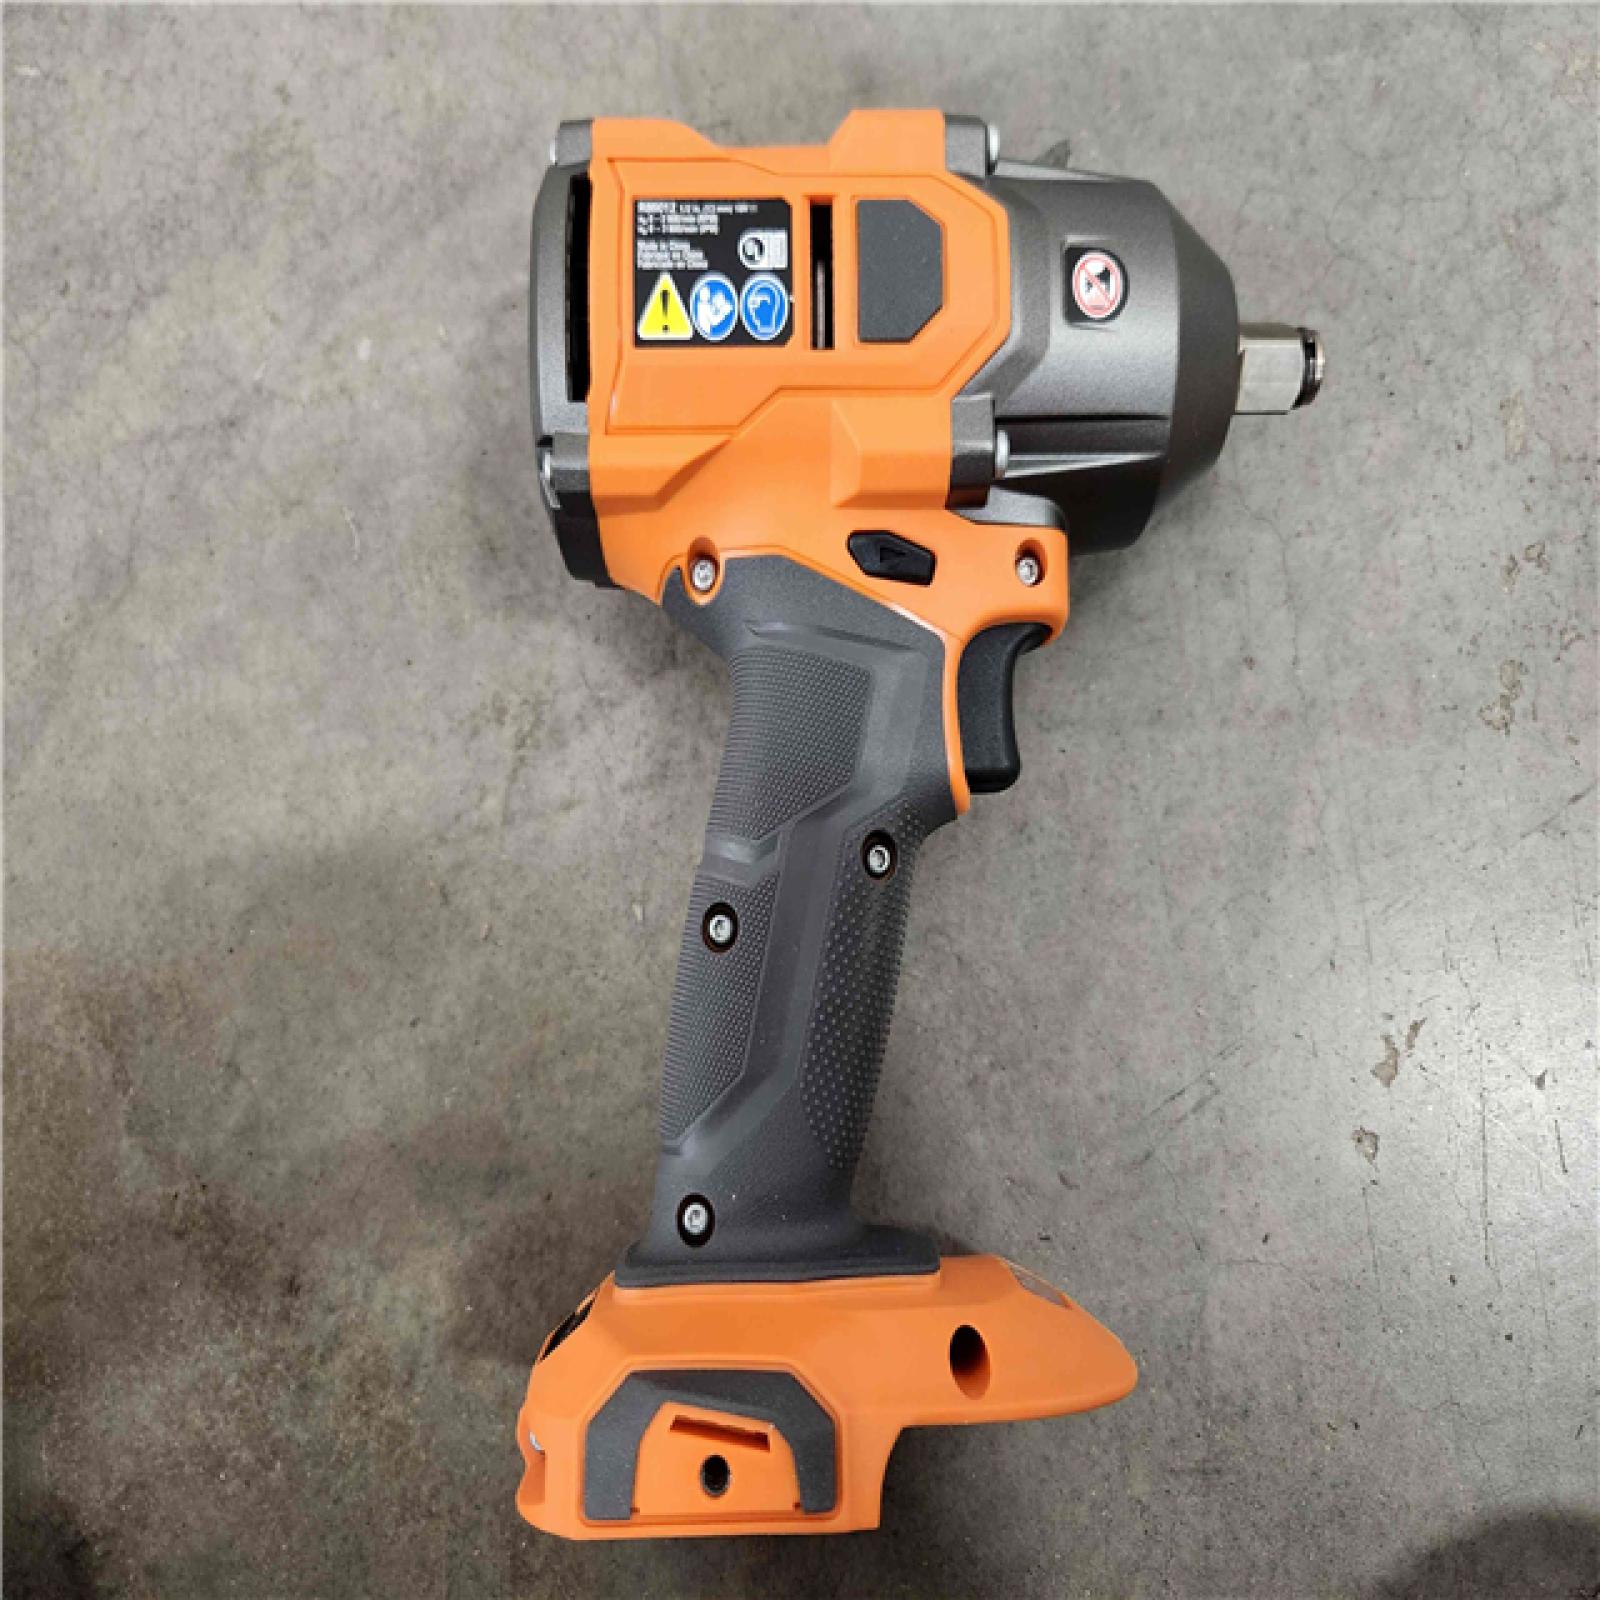 Phoenix Location NEW RIDGID 18V Brushless Cordless 4-Mode 1/2 in. Mid-Torque Impact Wrench with Friction Ring (Tool Only) R86012B